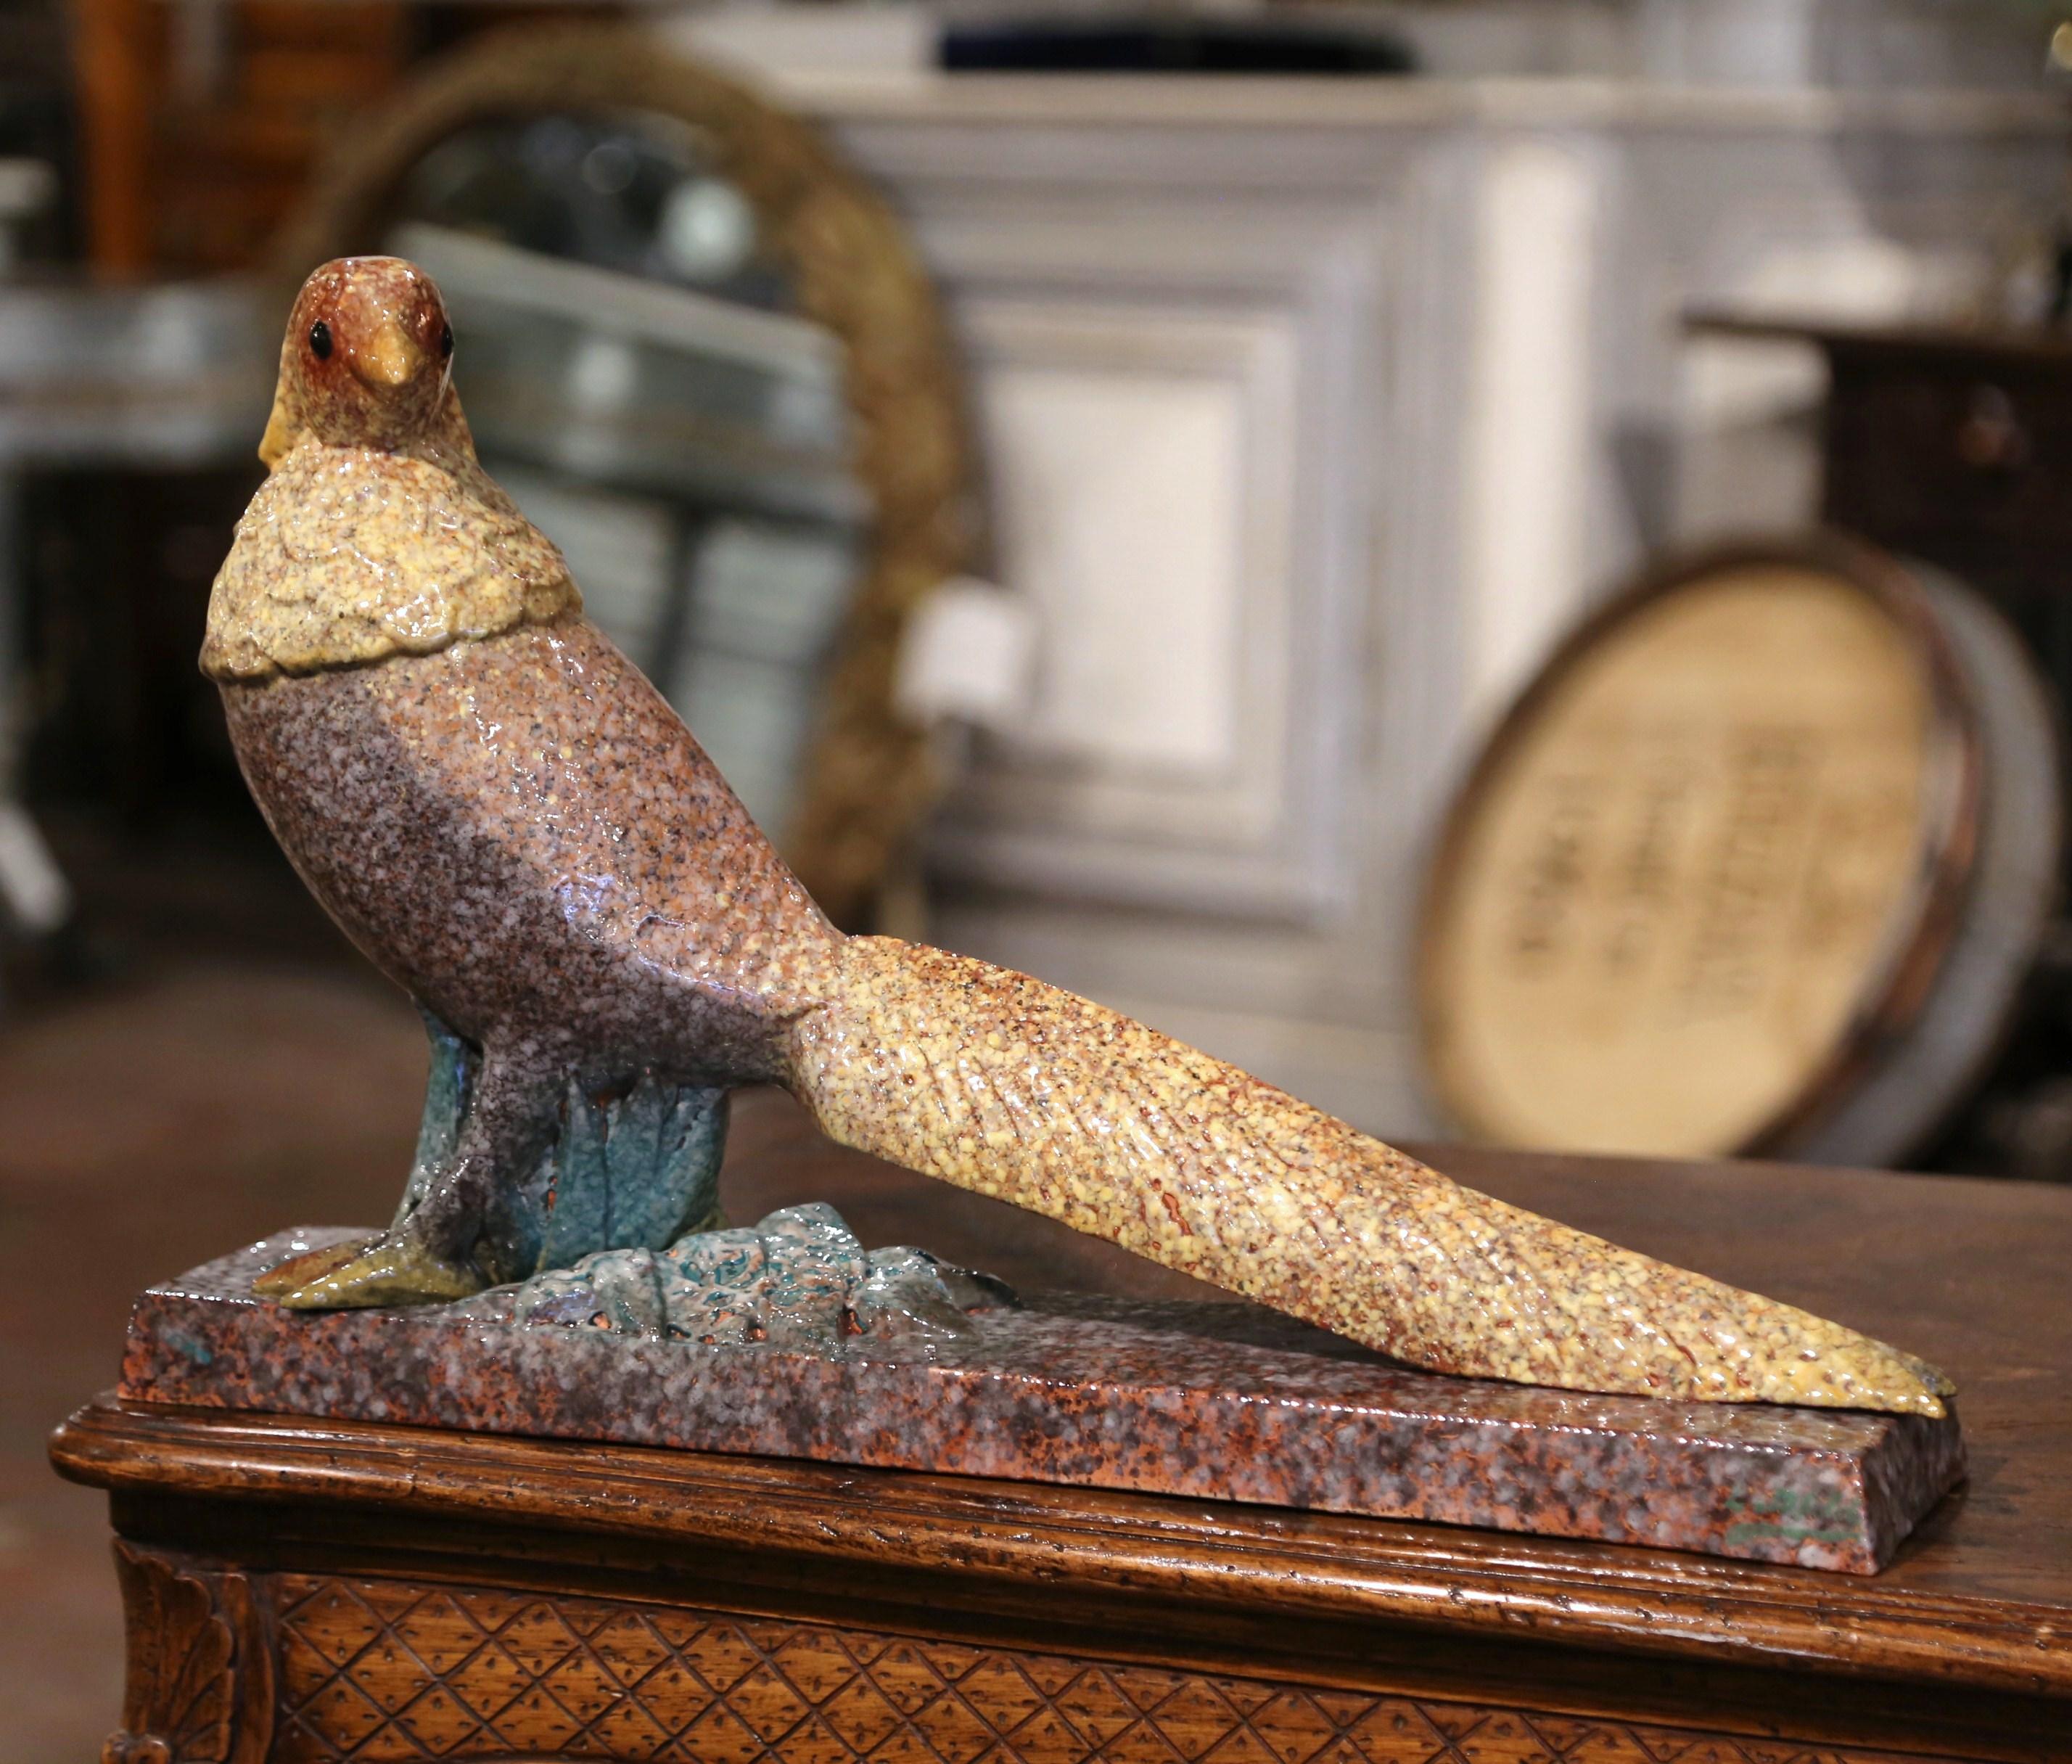 Decorate a ranch house, a hunting lodge or a man's office with this elegant and colorful antique bird sculpture. Crafted in France circa 1930 and built of ceramic, the sculpture depicts a proud pheasant resting on an integral rectangular base. The